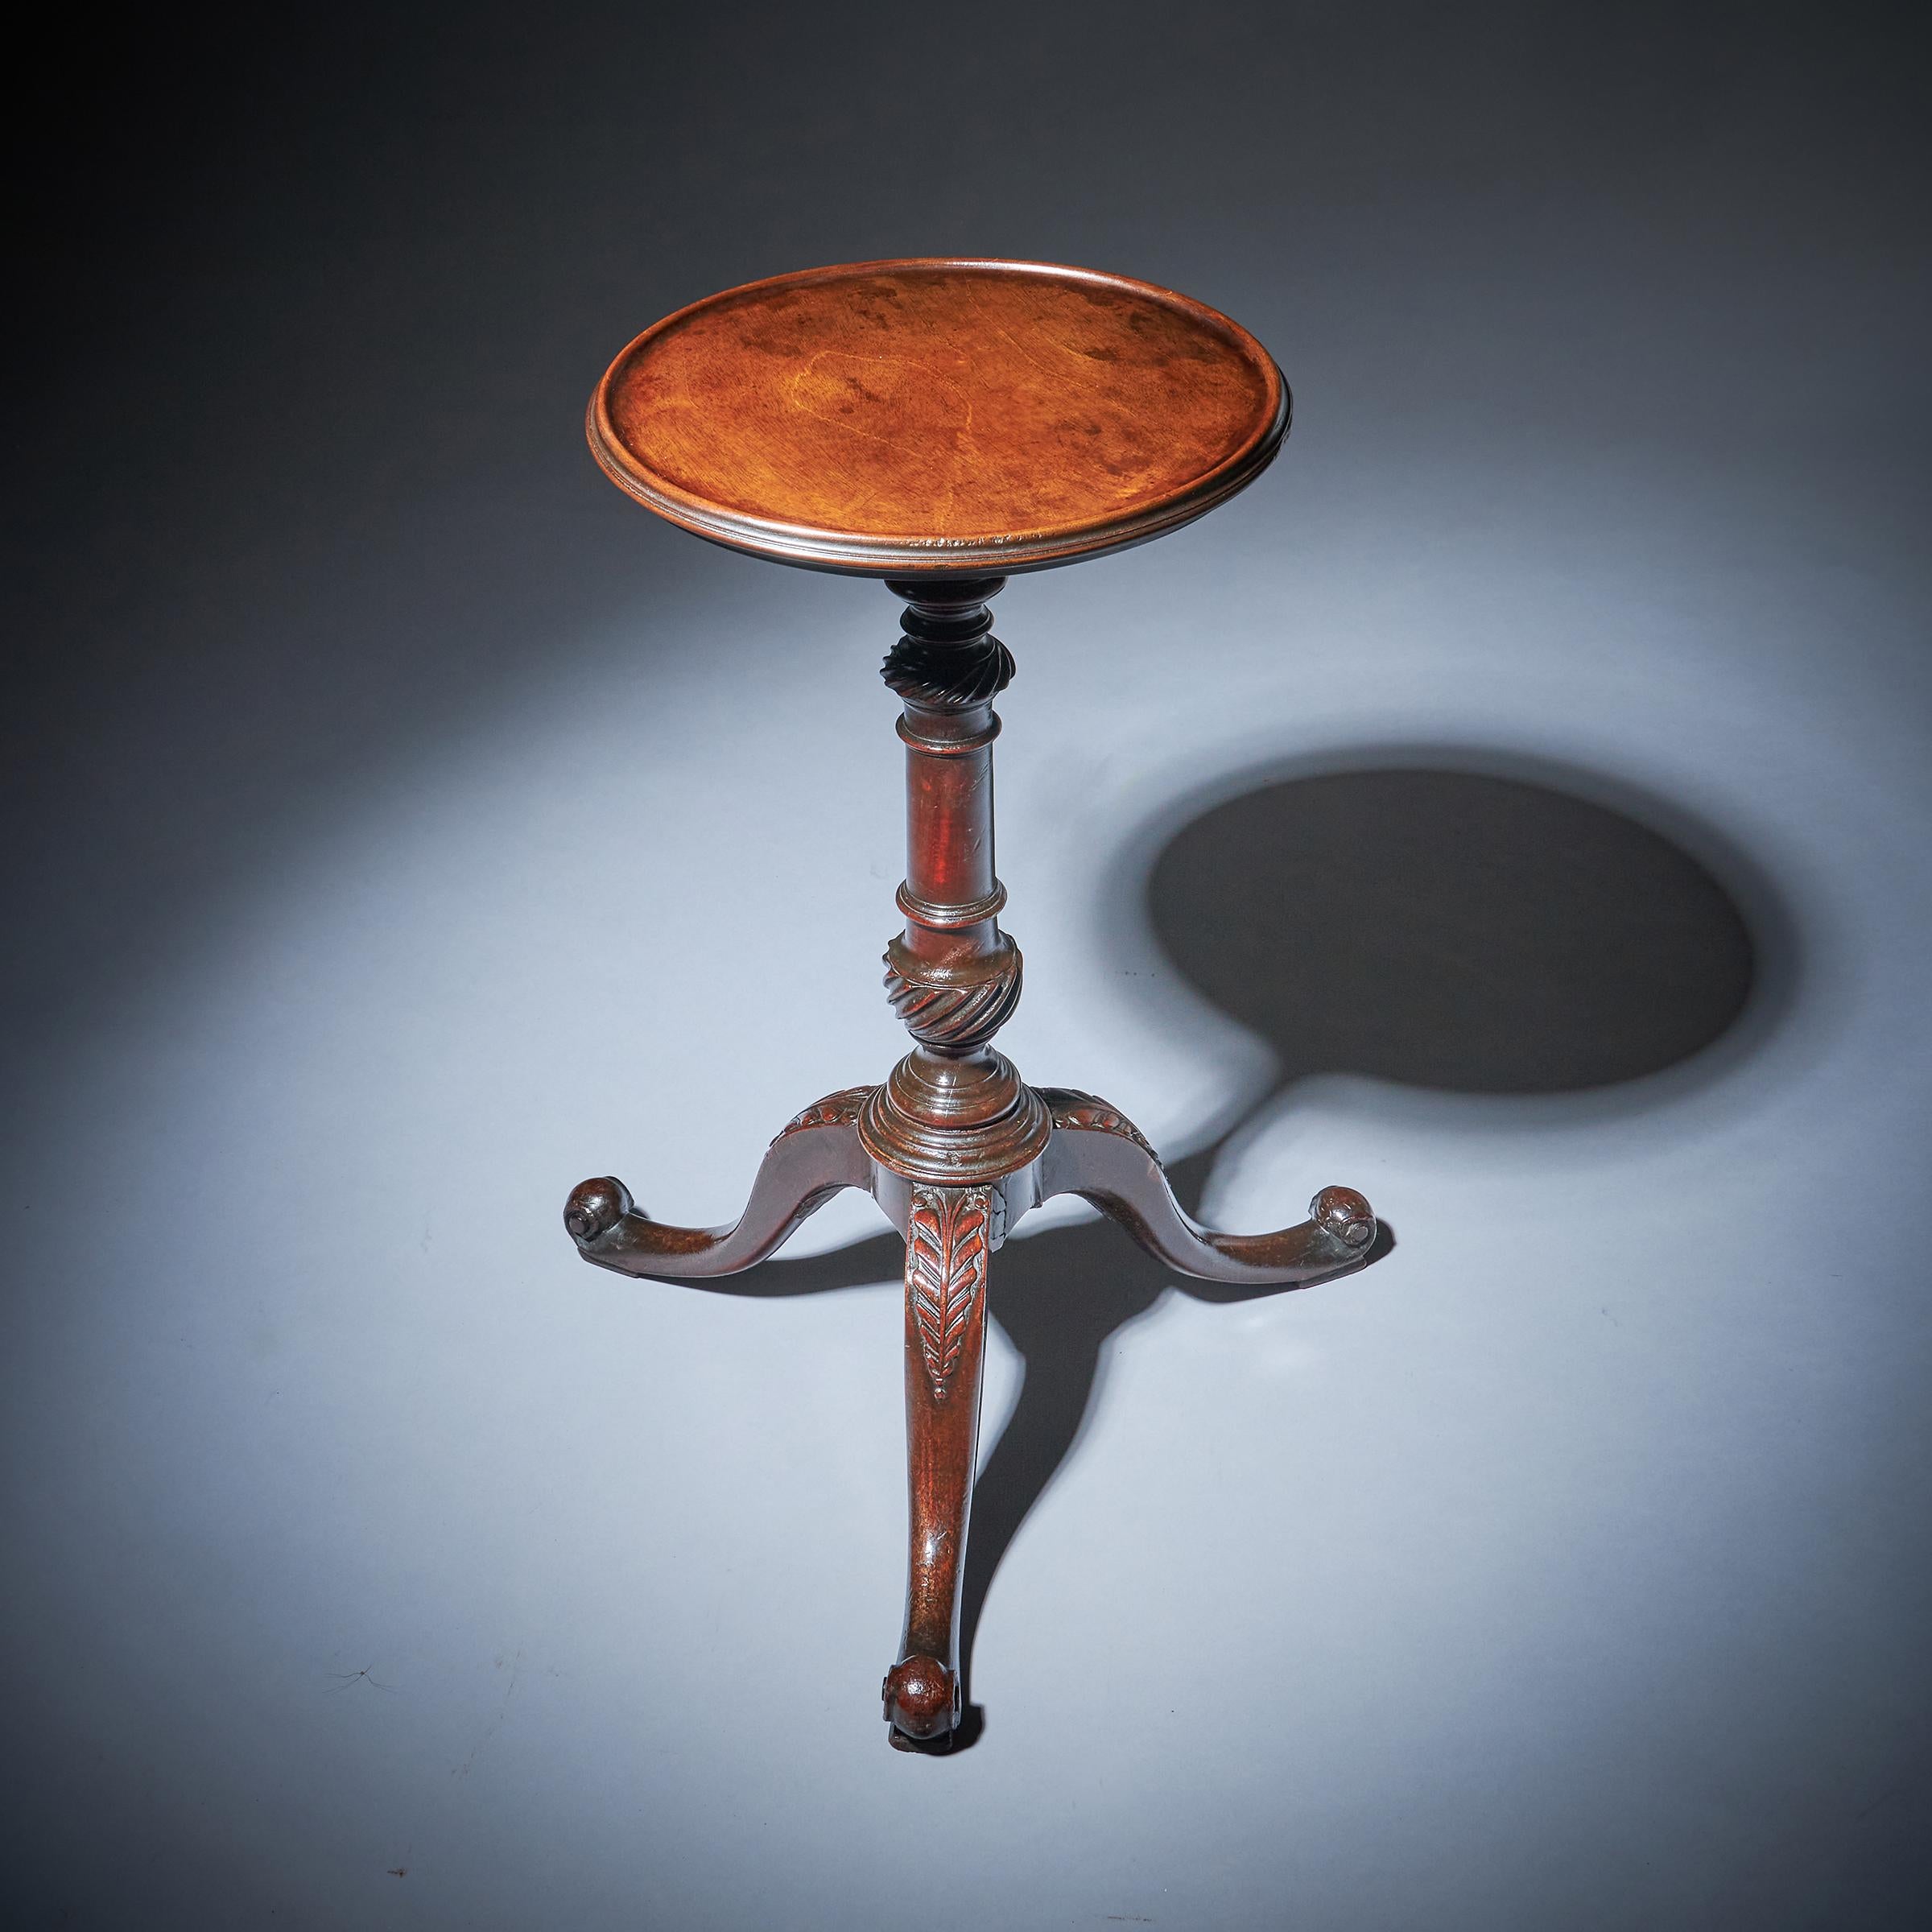 A beautiful George III kettle stand from the middle of the 18th century.

The solid mahogany one-piece dished top sits above a solid baluster column with carved gadrooned balusters to the top and bottom over three cabriole legs terminating on what